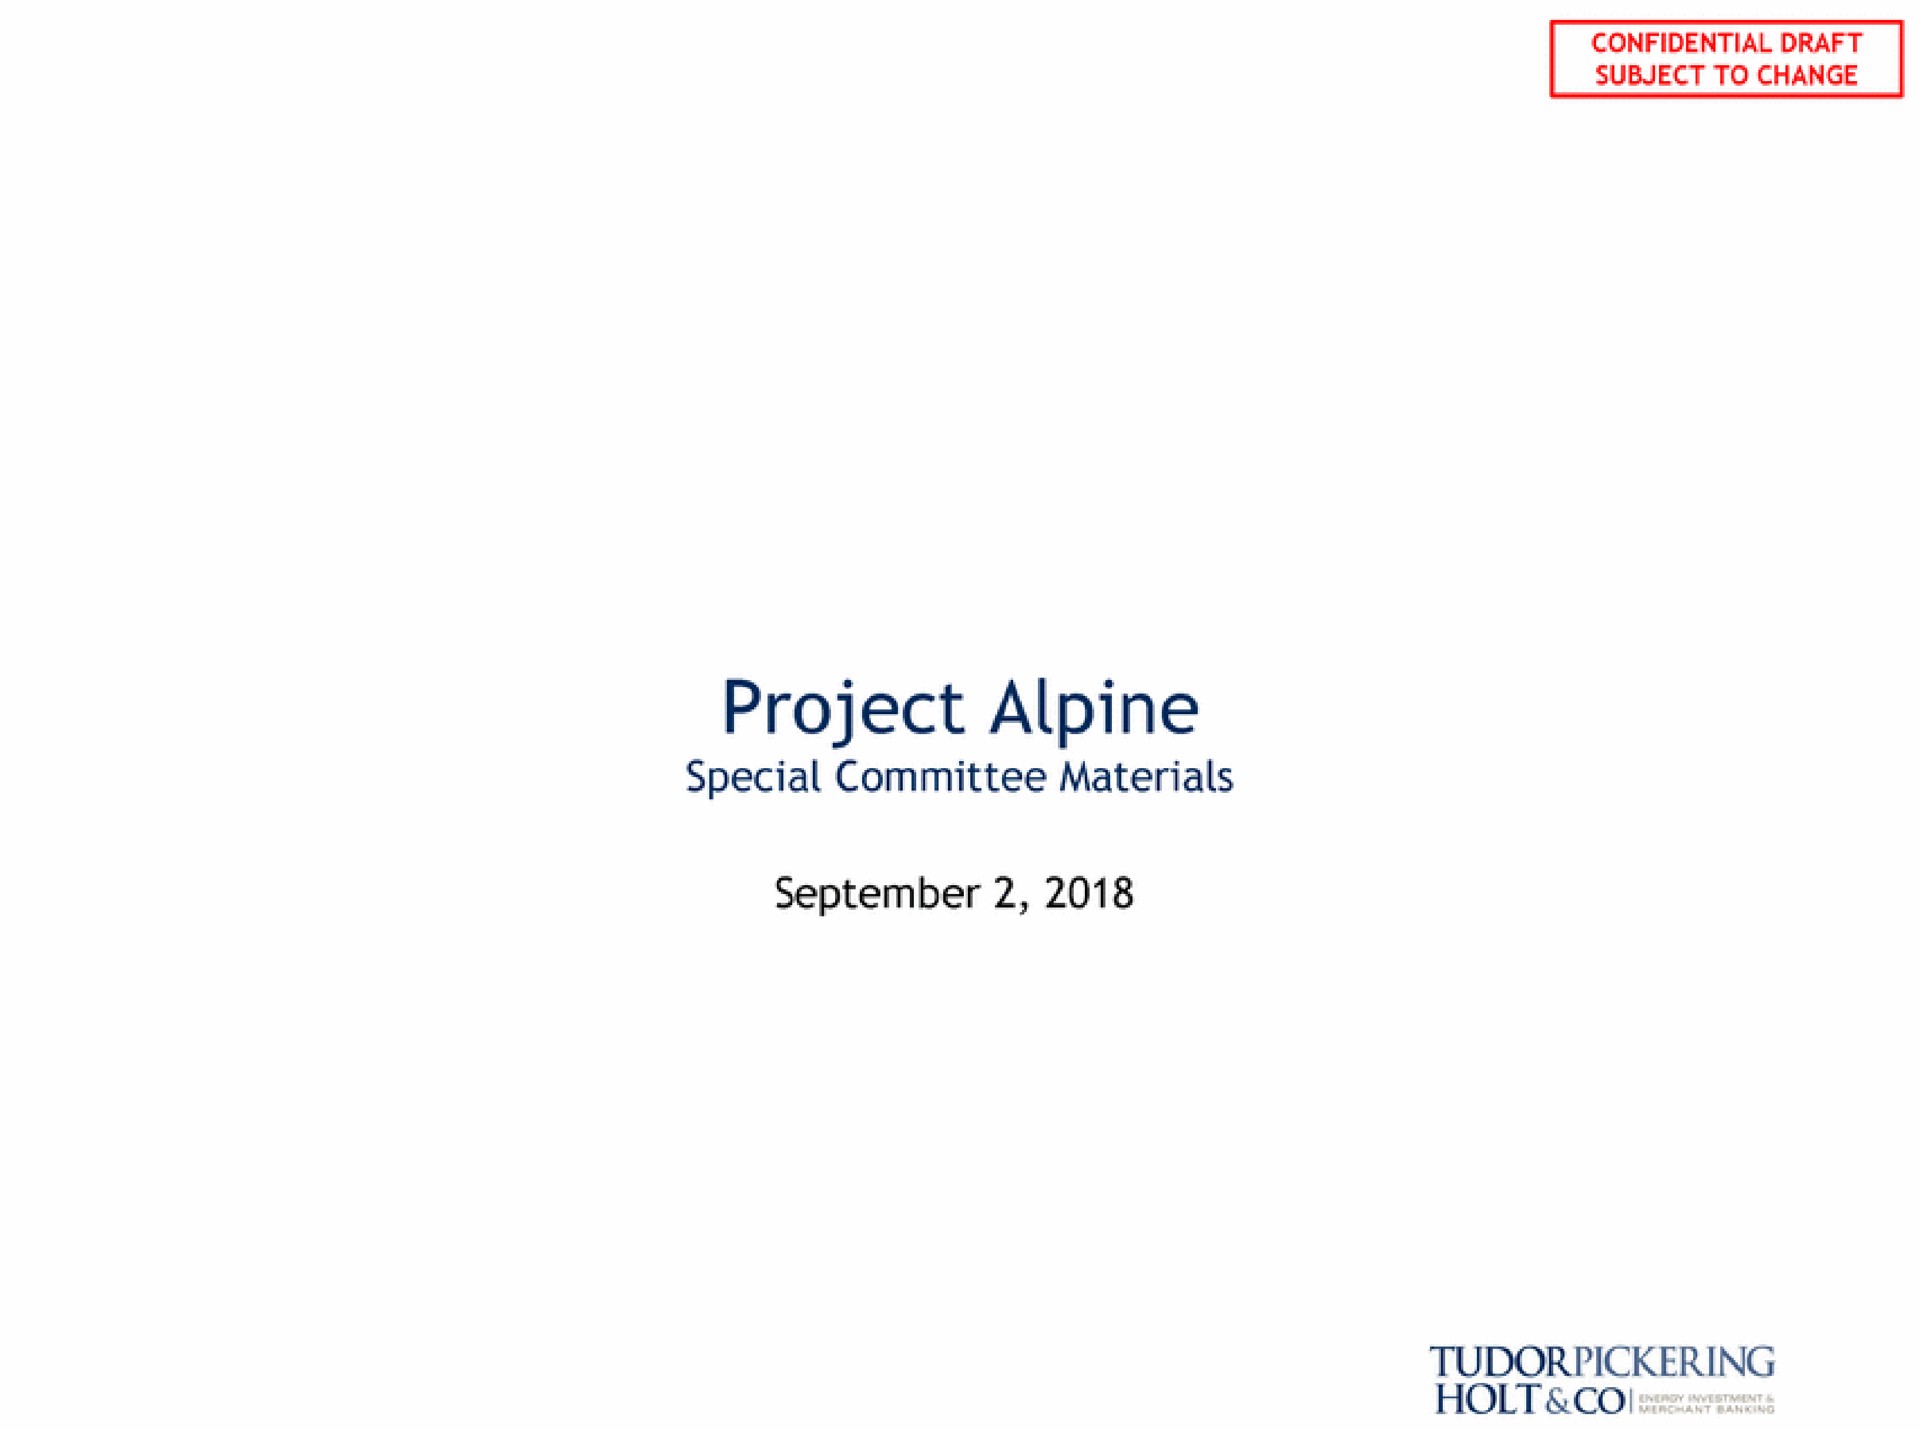 project alpine special committee materials holt sexs | Tudor, Pickering, Holt & Co